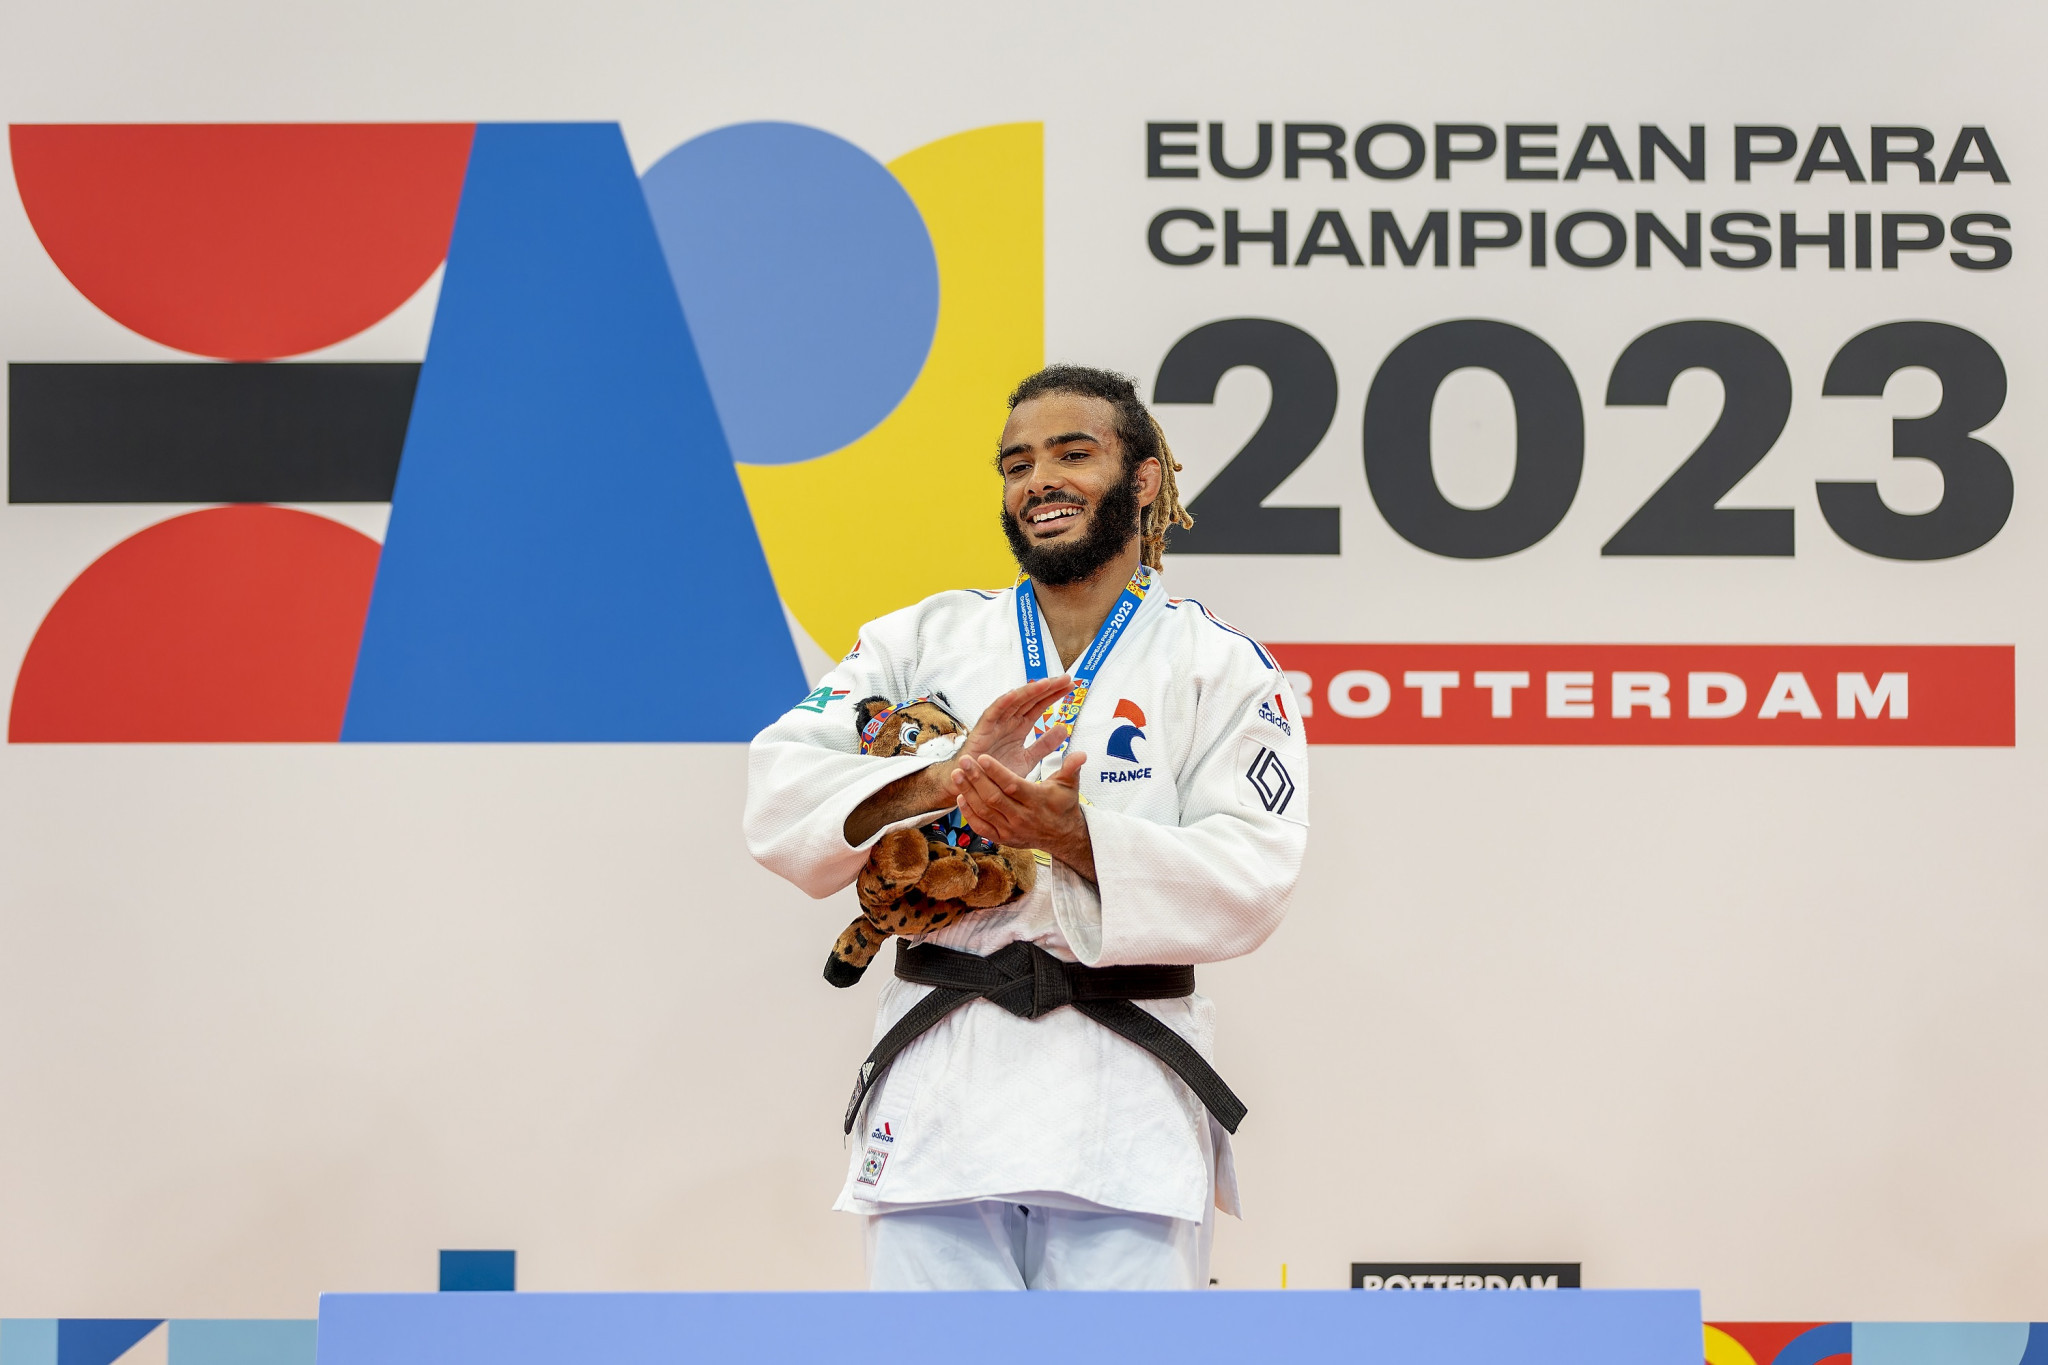 With a little more than one year to go until Paris hosts the Paralympics, Frenchman Hélios Latchoumanaya boosted his hopes of gold on home soil with victory in Rotterdam ©EPC